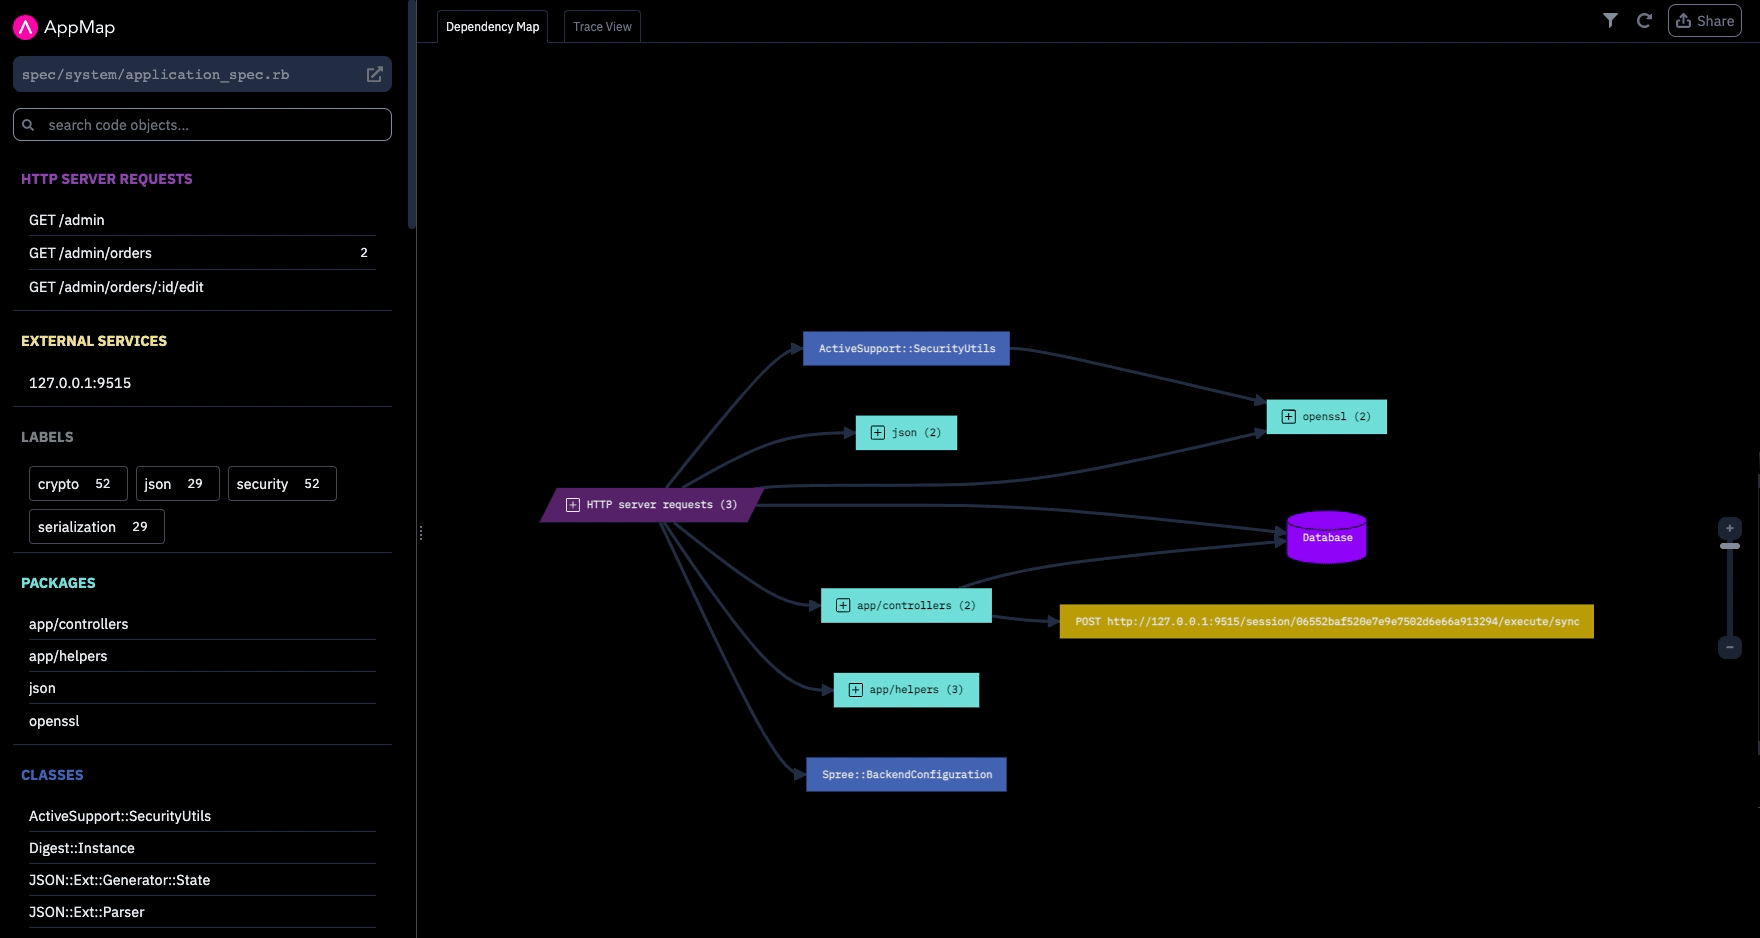 View detailed information about dependencies